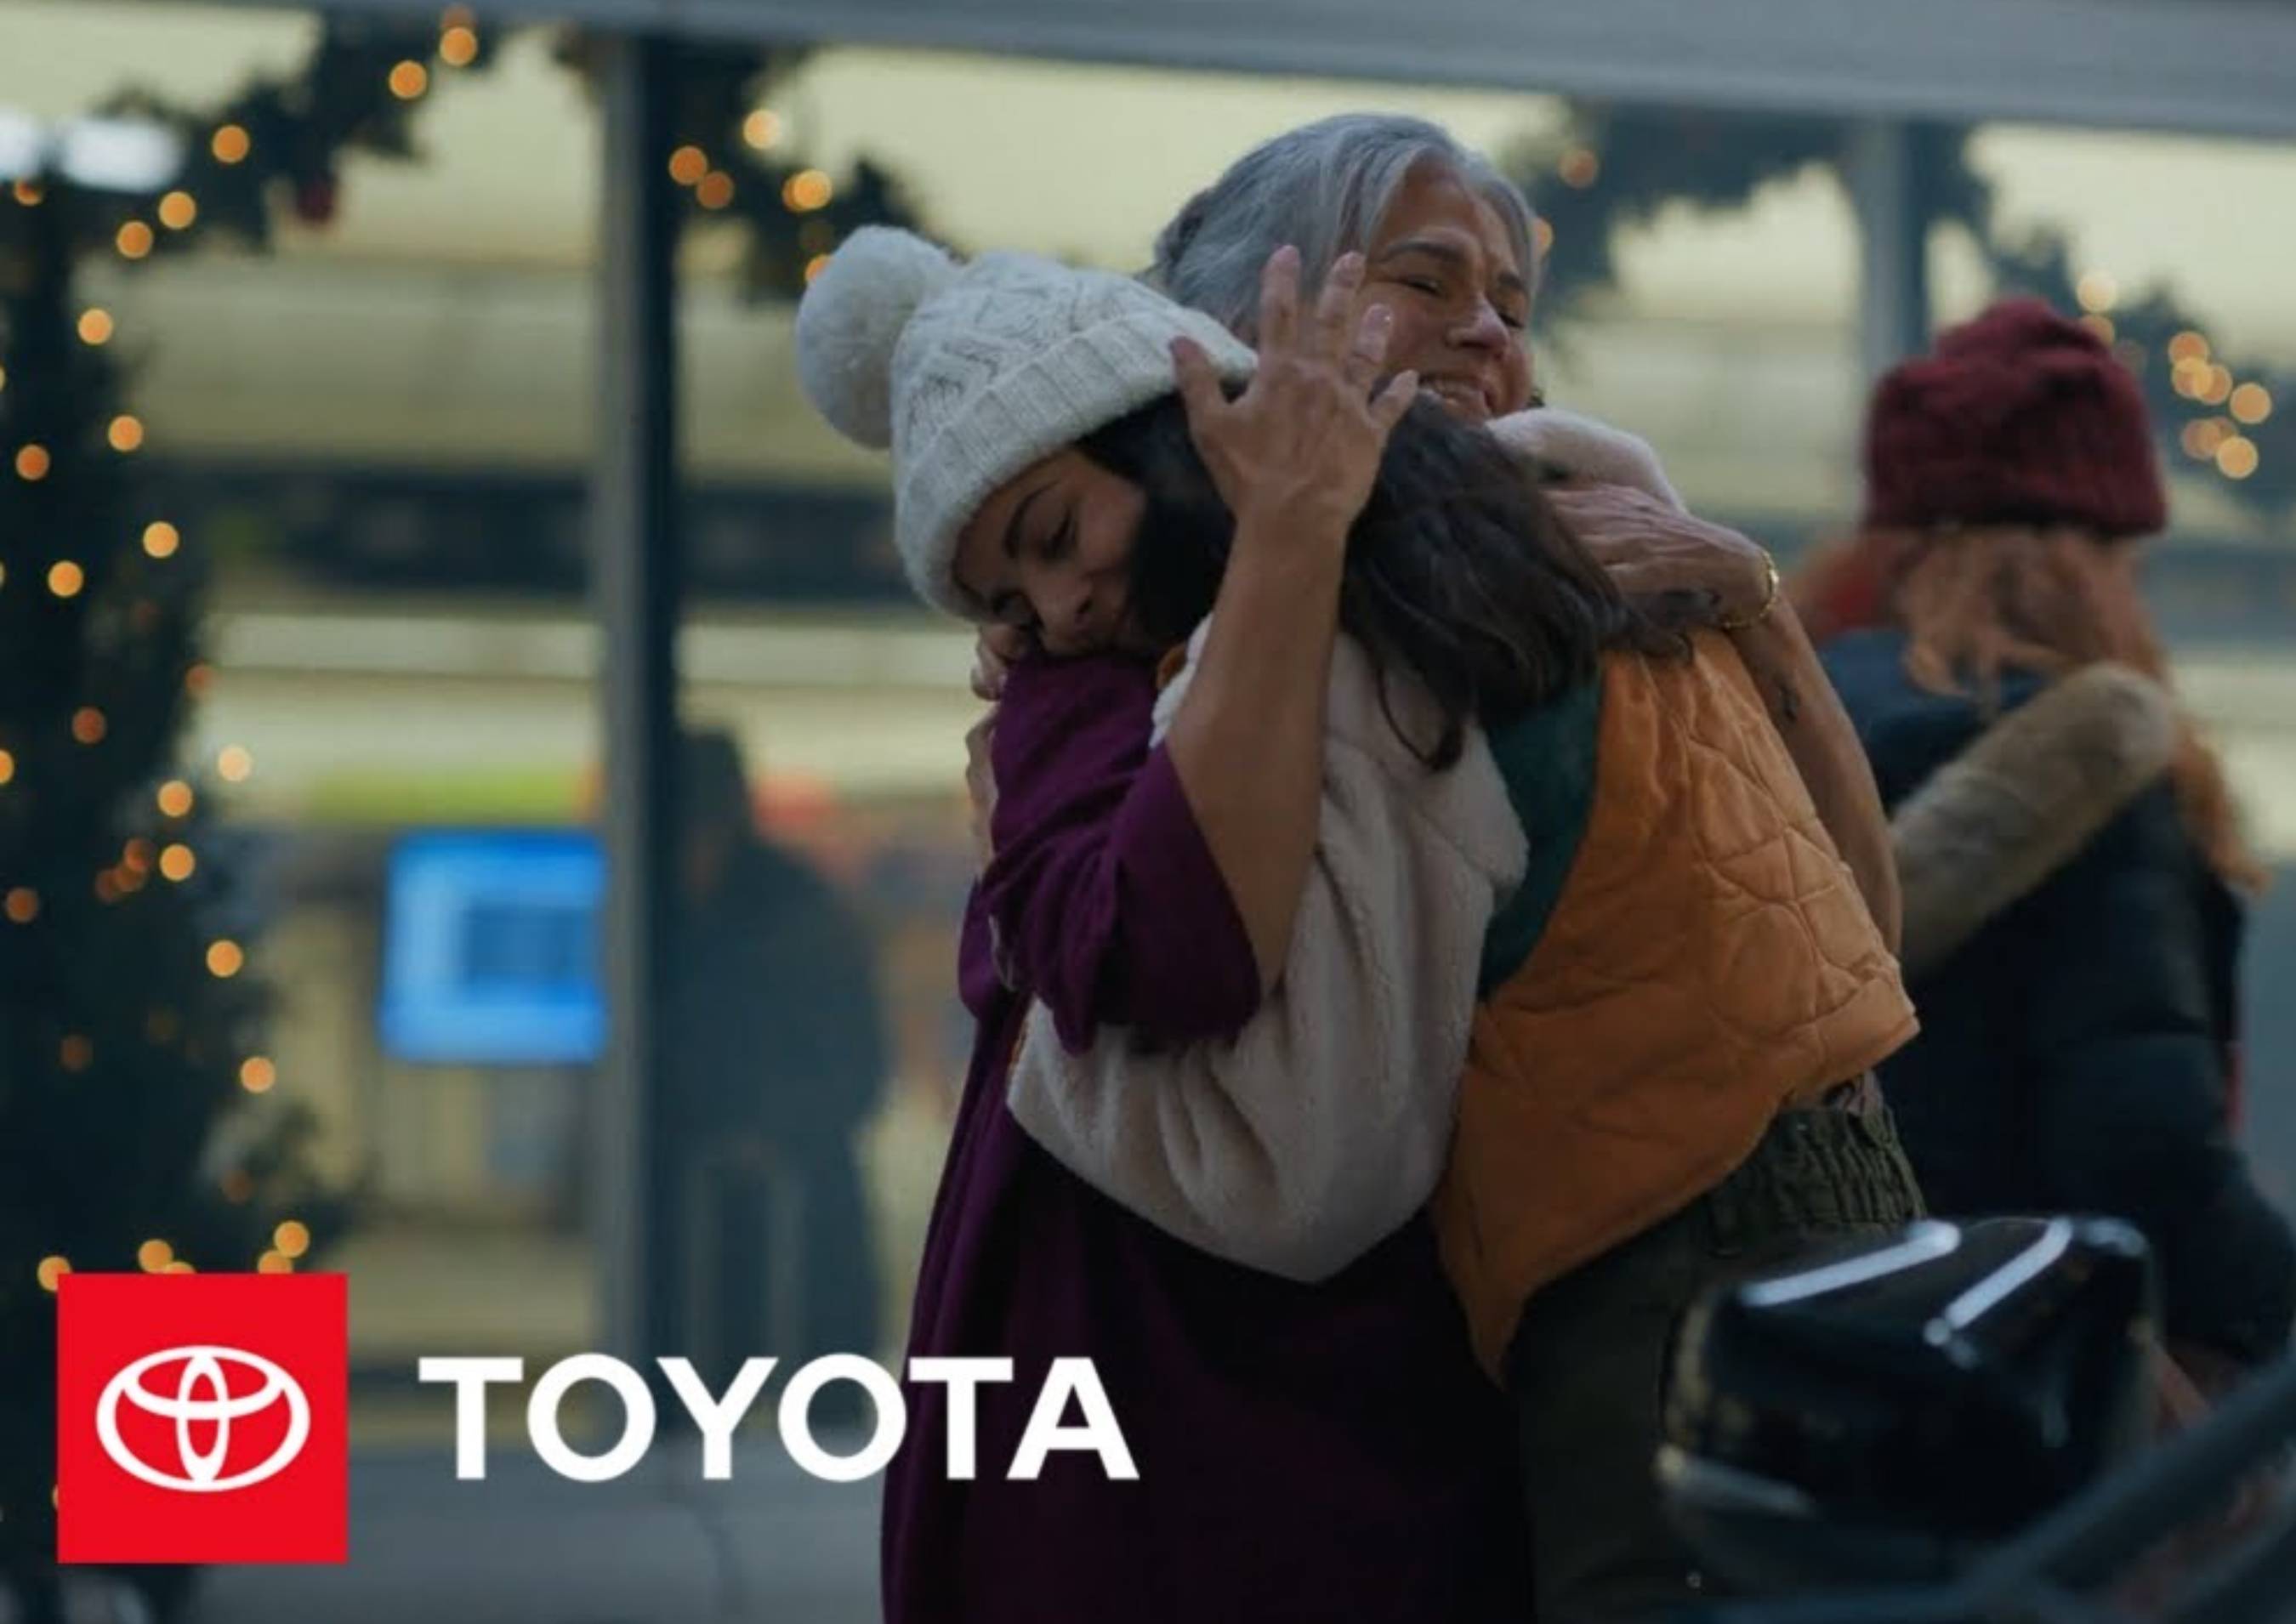 Toyota’s holiday spot “Arrivals,” developed by Conill Advertising, shares the message of togetherness and reuniting for the holidays.